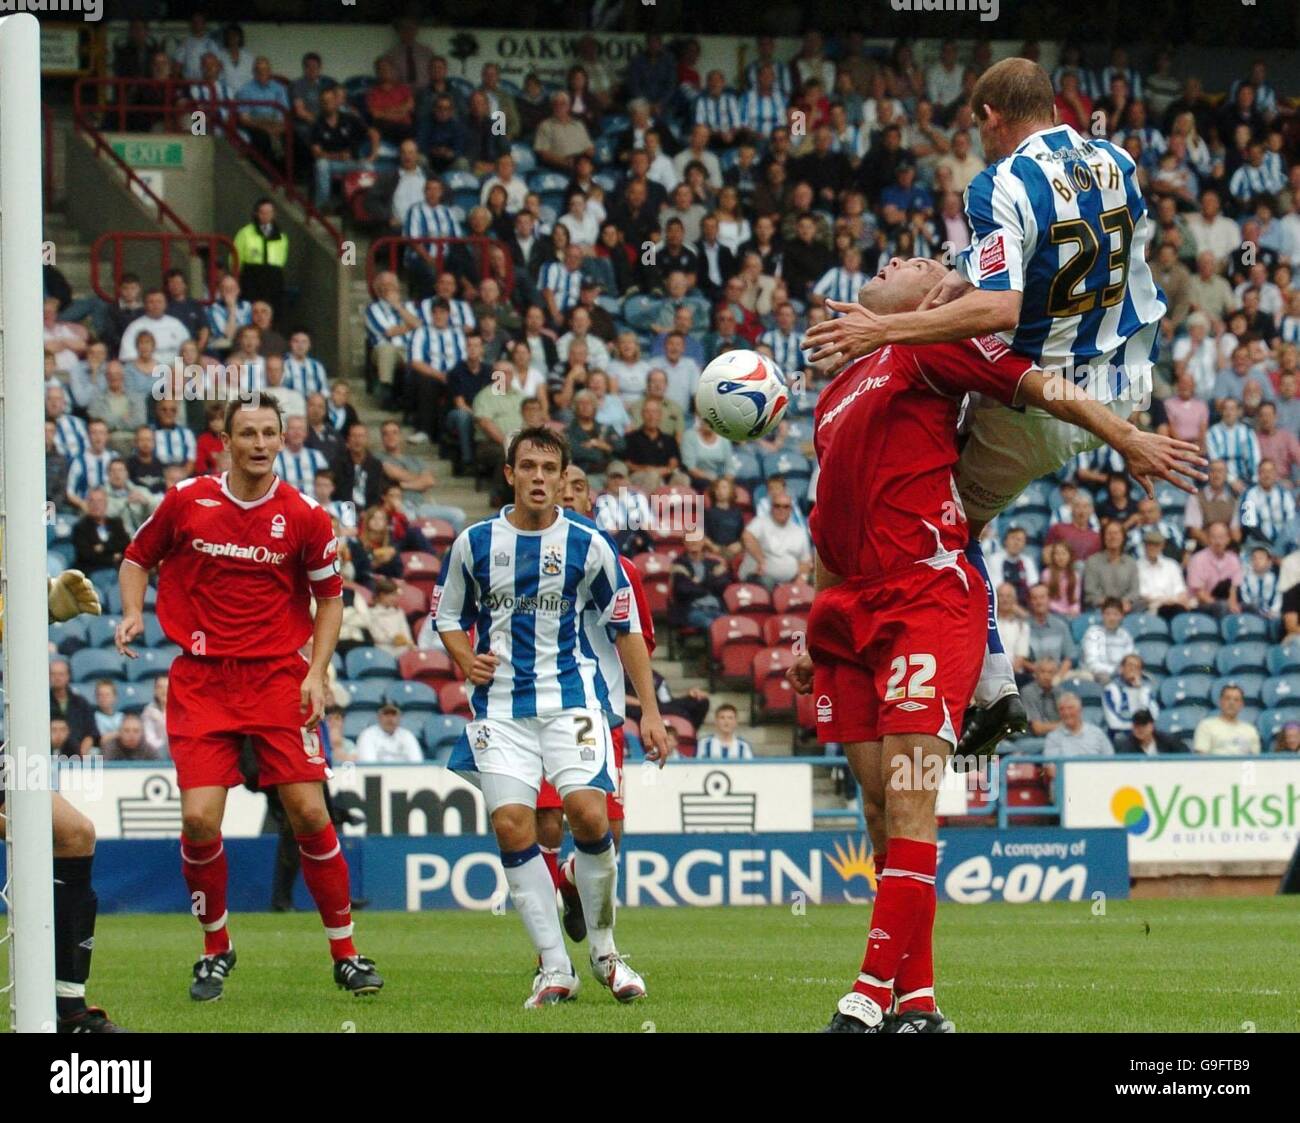 Huddersfield's Andy Booth (right) heads the ball, only to have it saved by Nottingham Forest's Paul Smith during the Coca-Cola League One match at the Galpharm Stadium, Huddersfield. Stock Photo